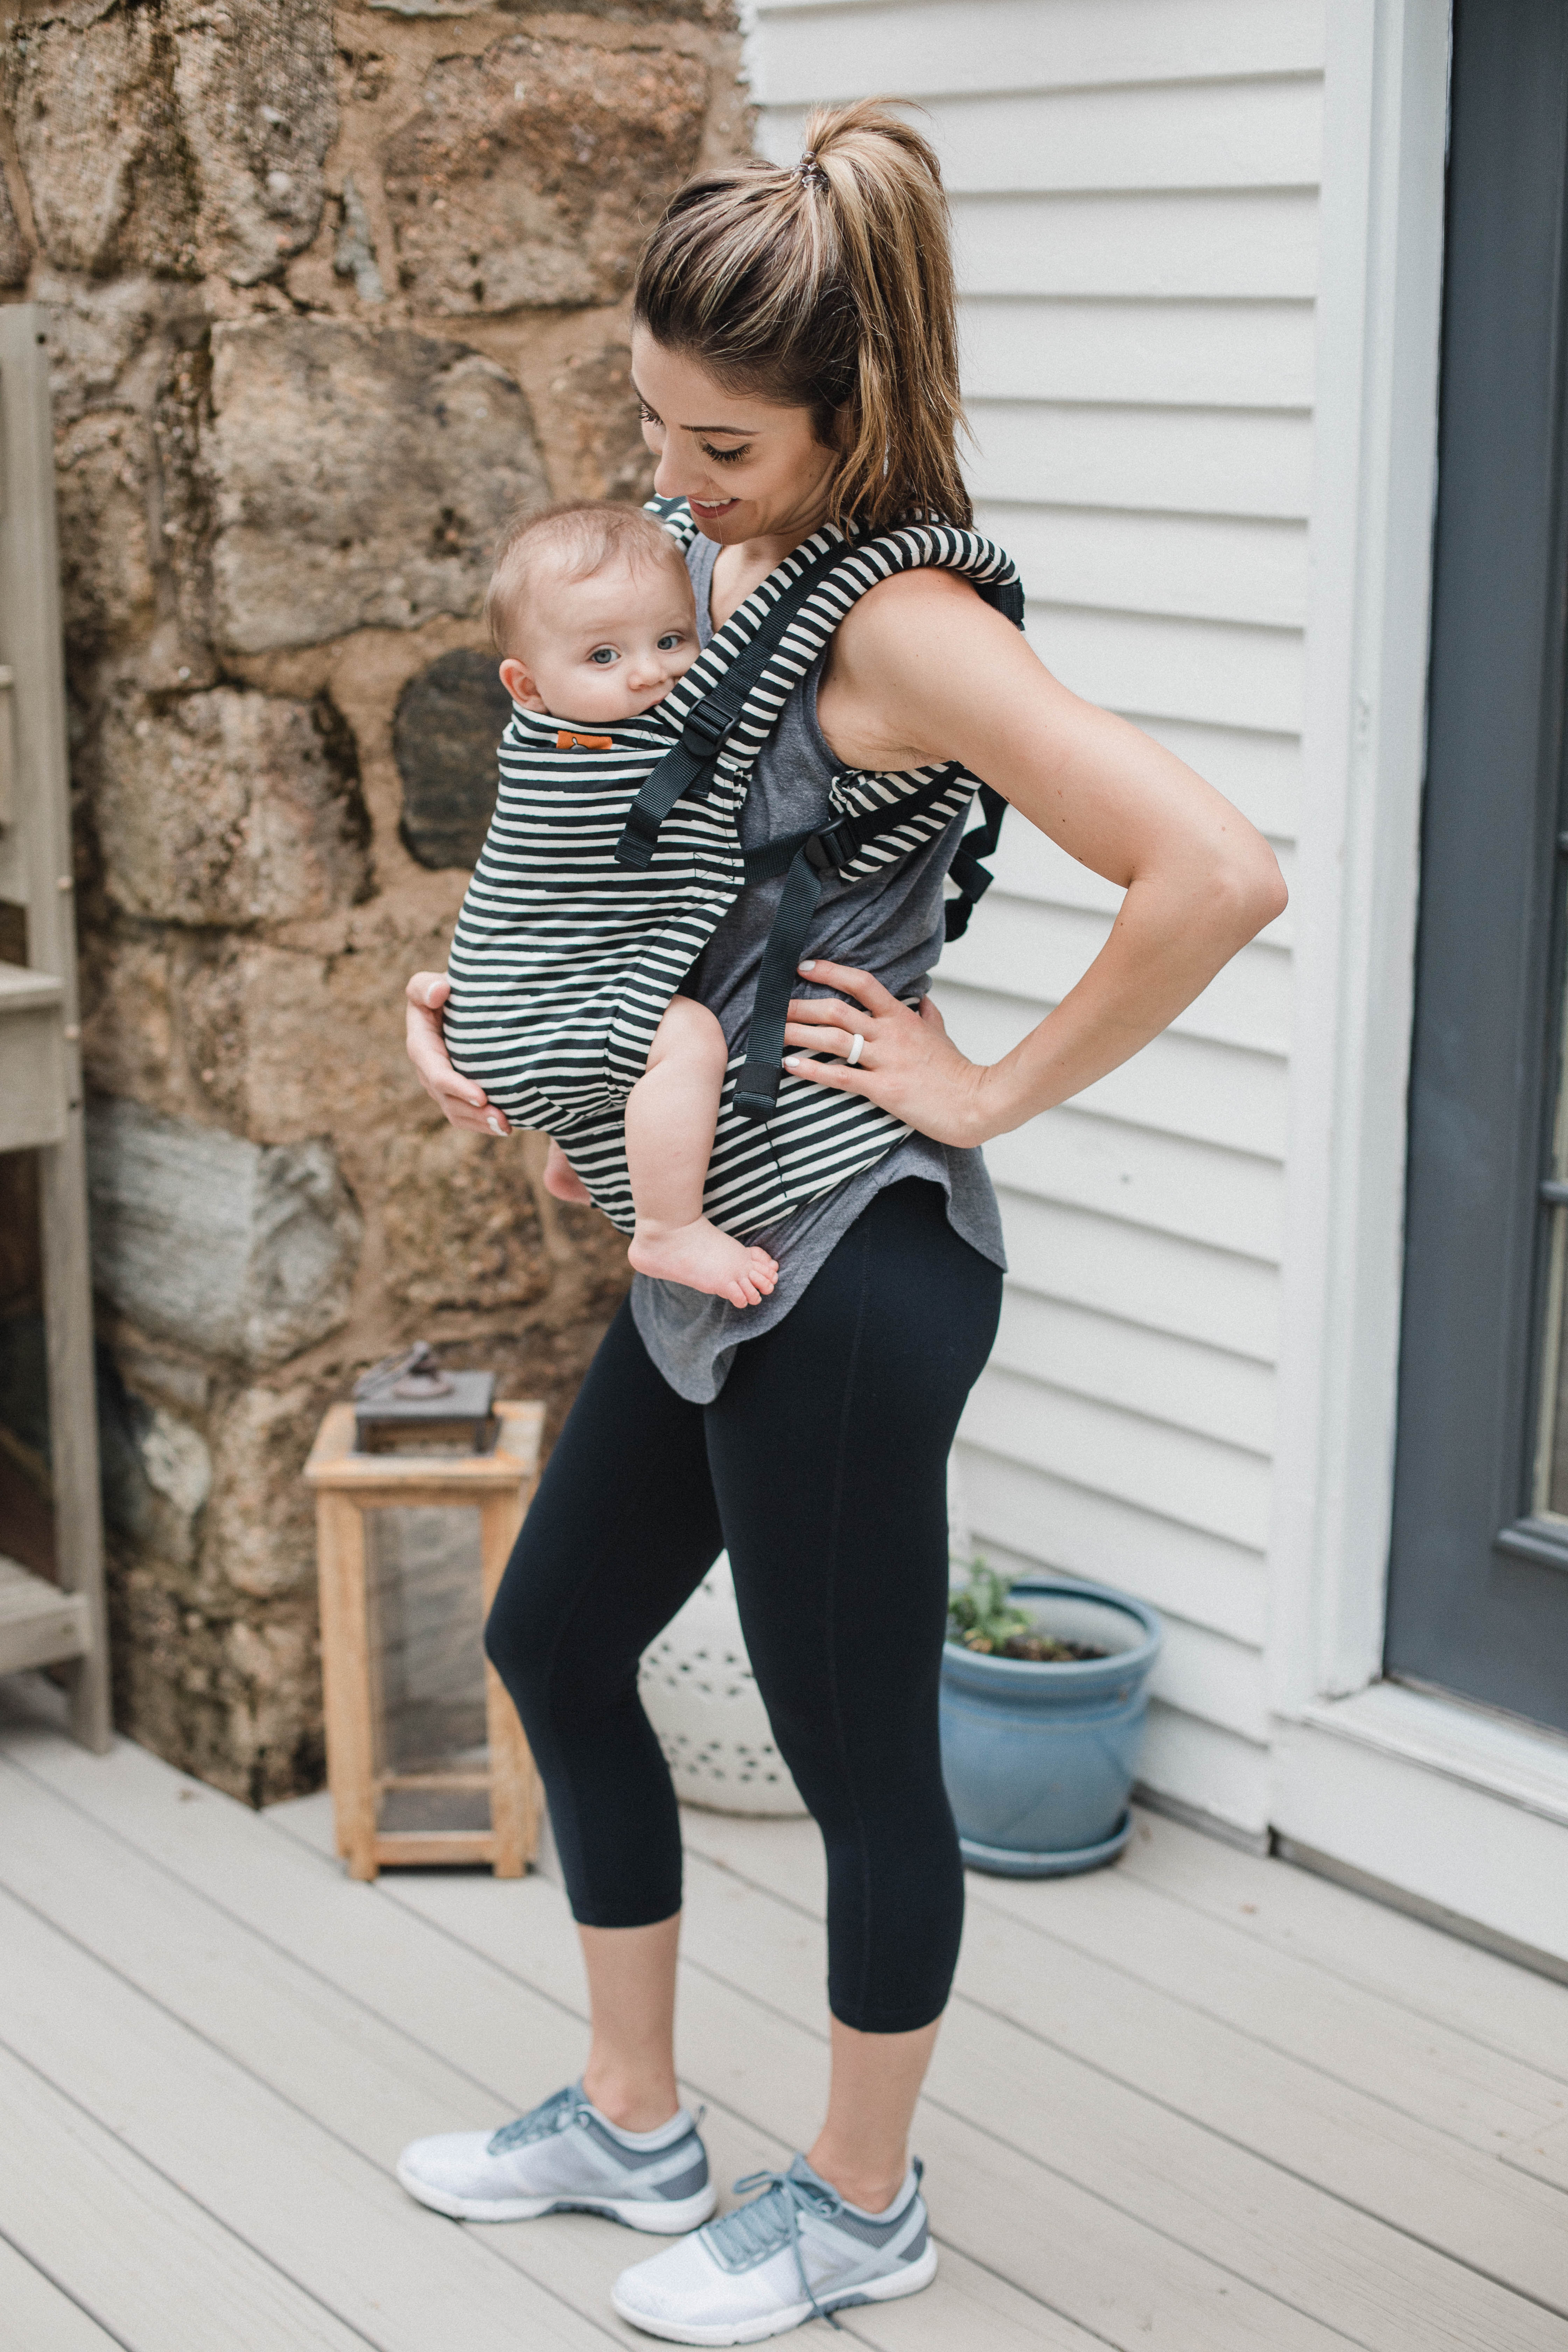 Connecticut life and style blogger Lauren McBride shares the Best Baby Carriers for babies ages newborn to toddlerhood and the various features each offers. 